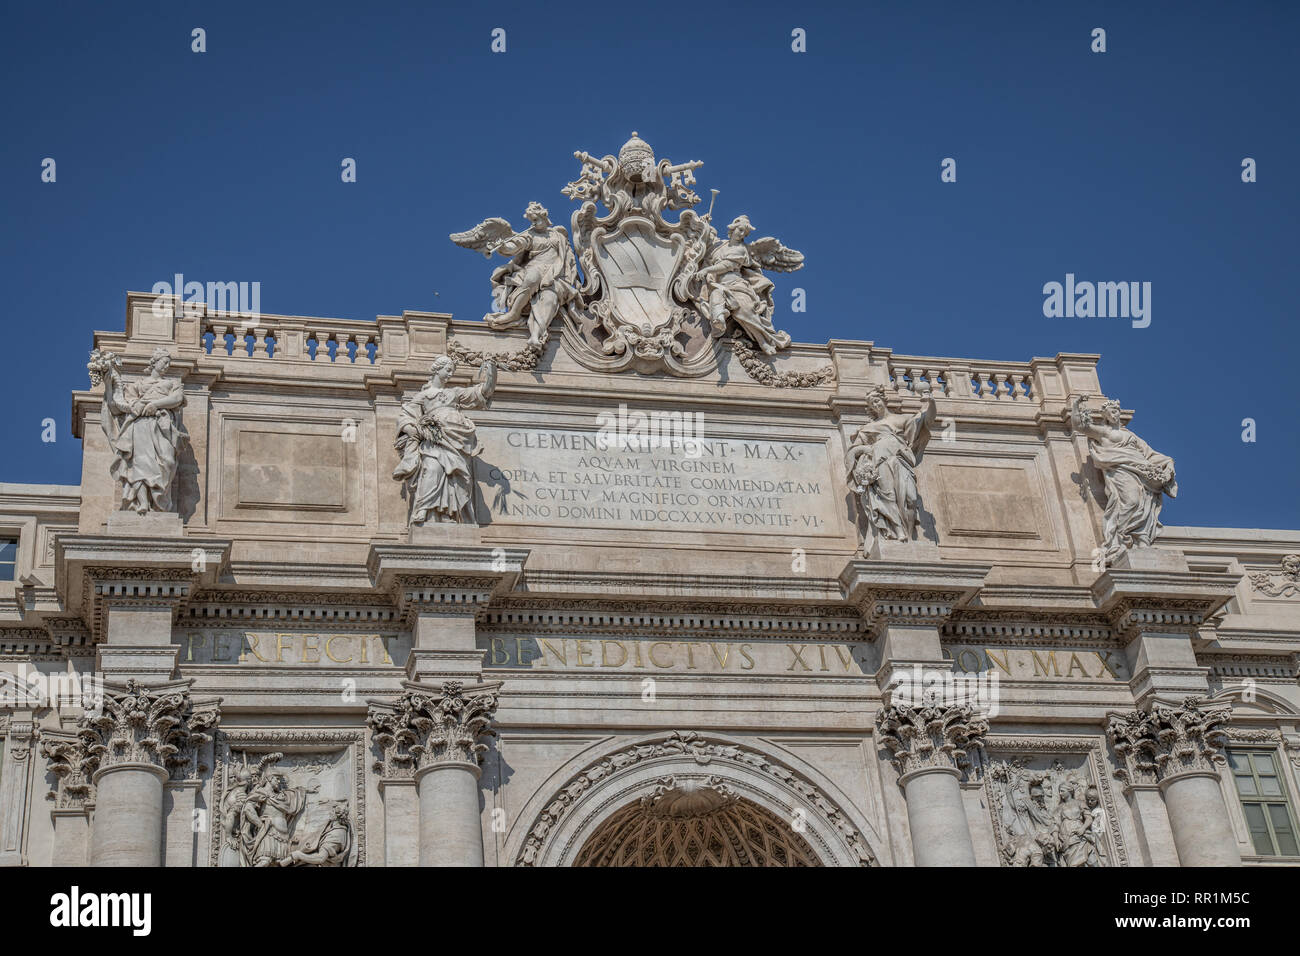 The Trevi Fountain in Rome Italy on a sunny spring day Stock Photo